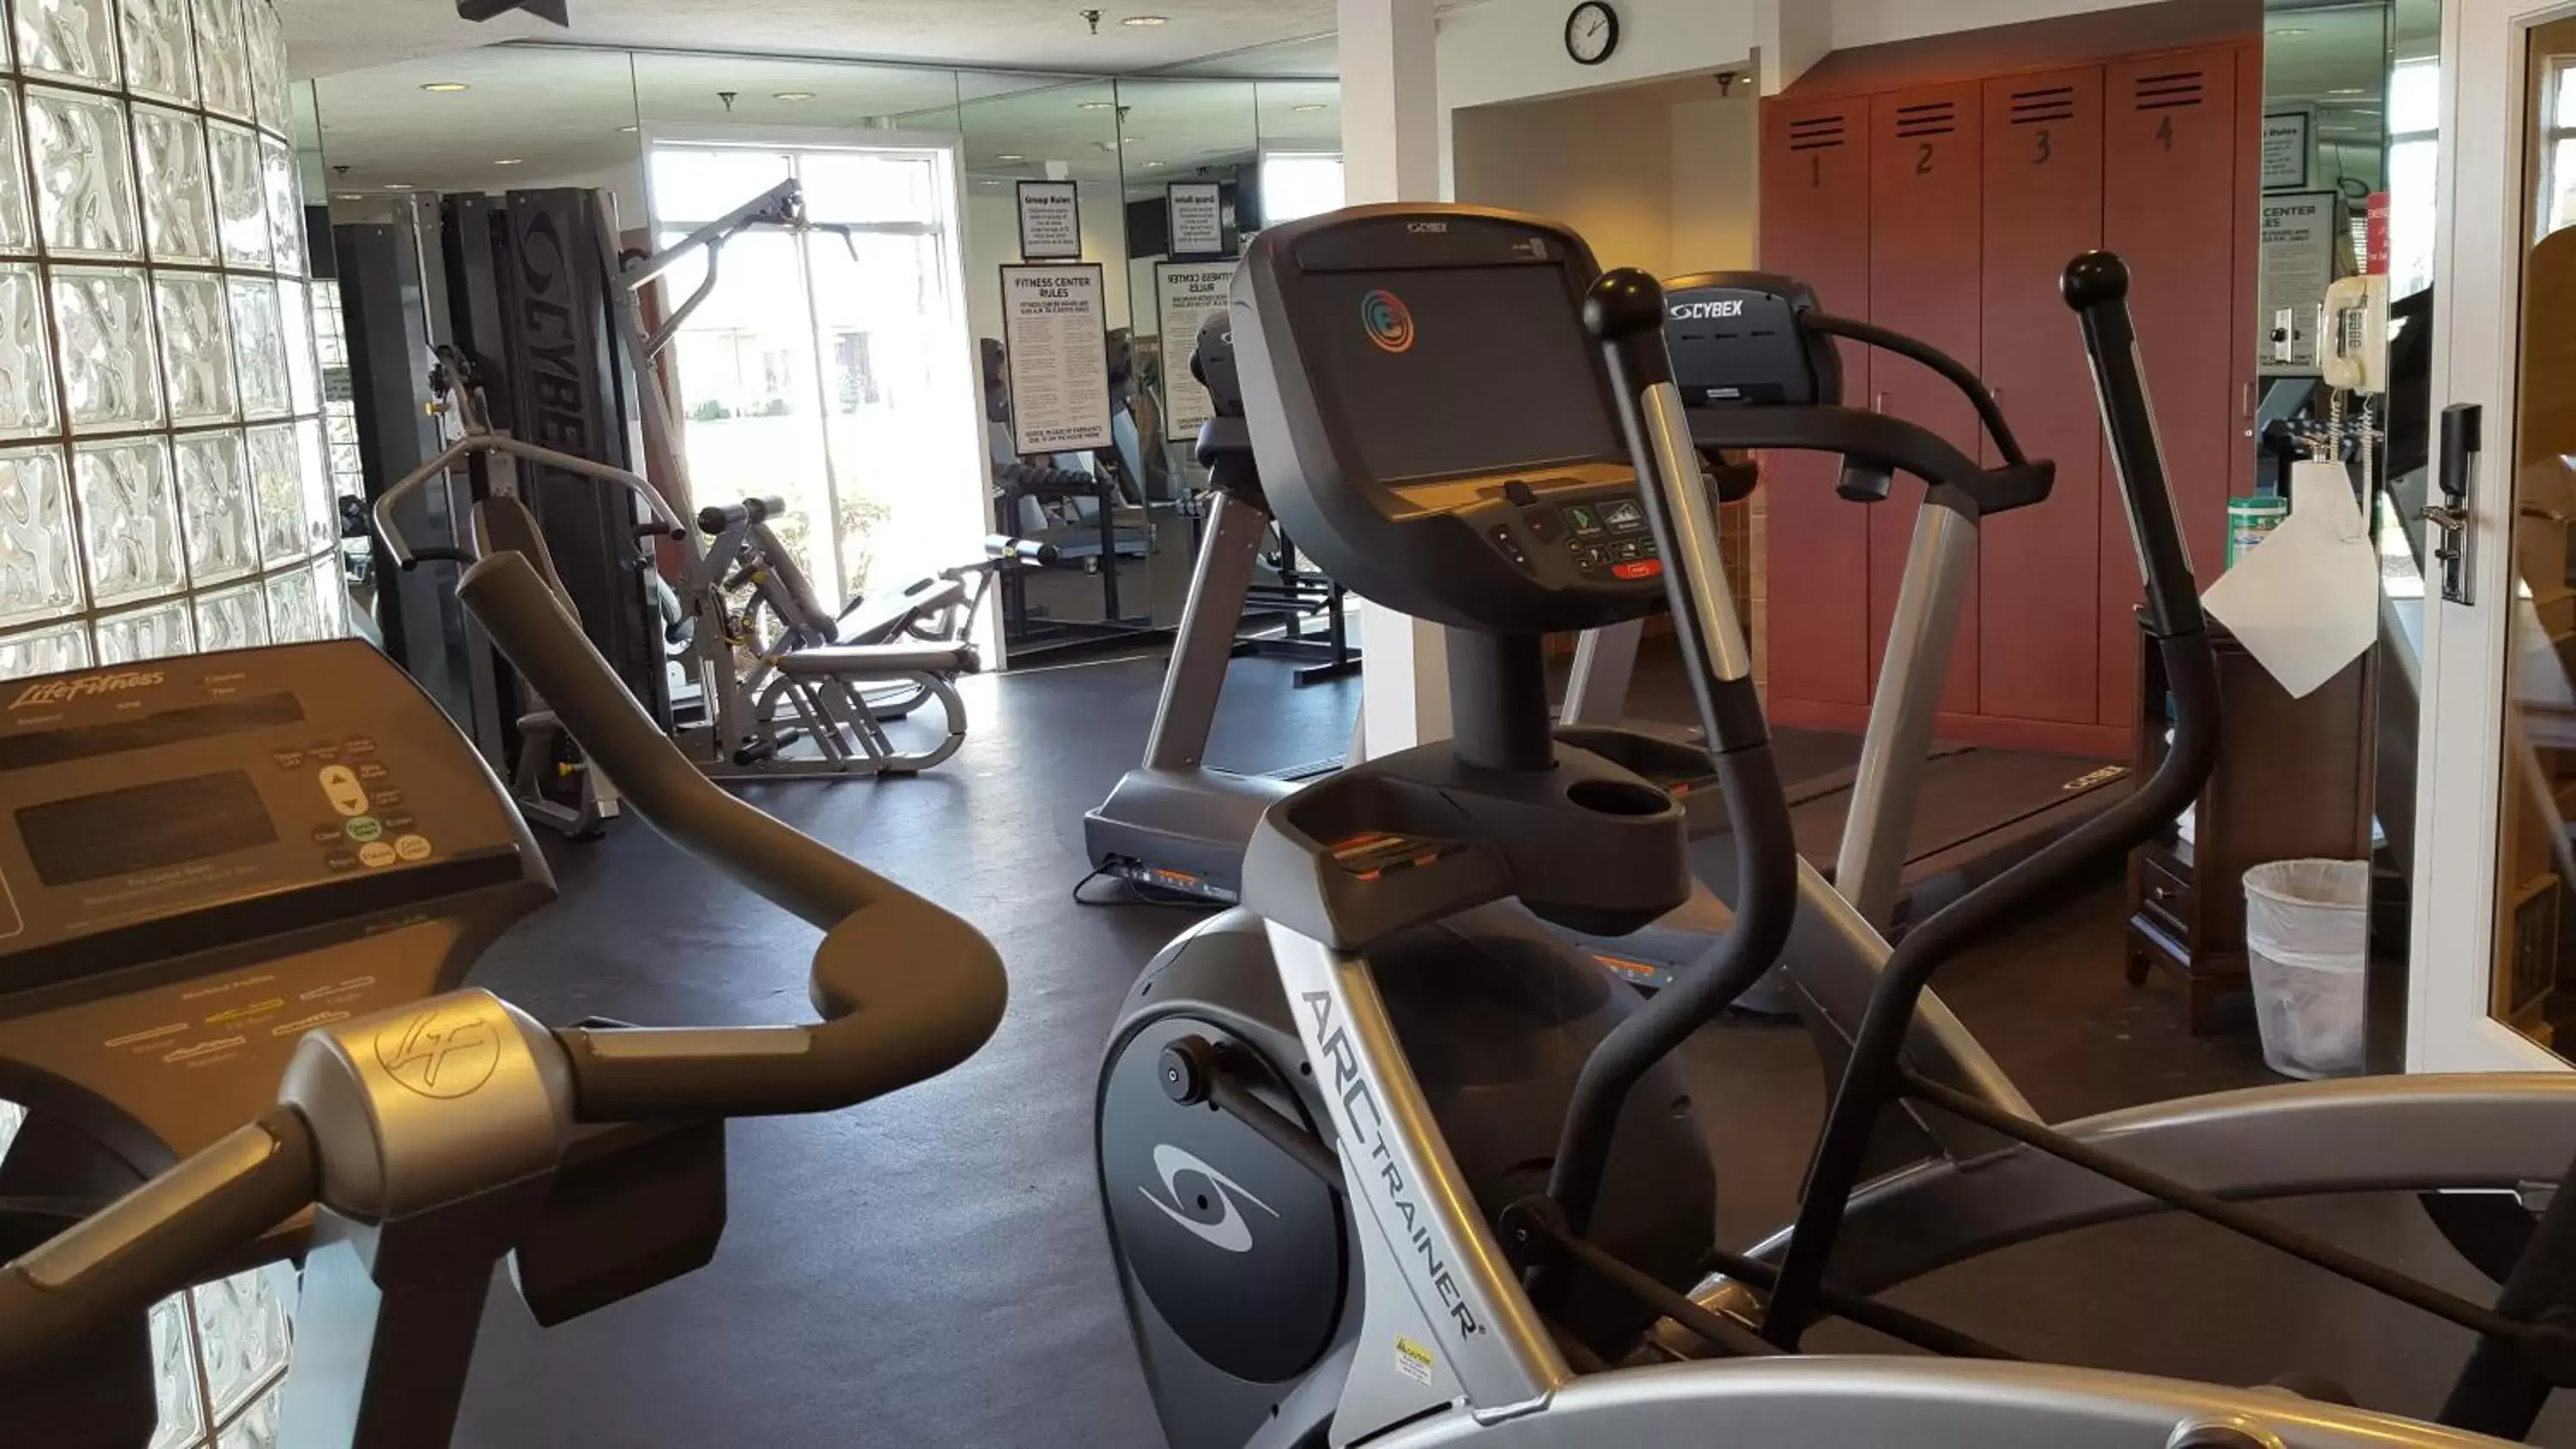 Fitness centre/facilities, Fitness Center/Facilities in Varsity Clubs of America South Bend